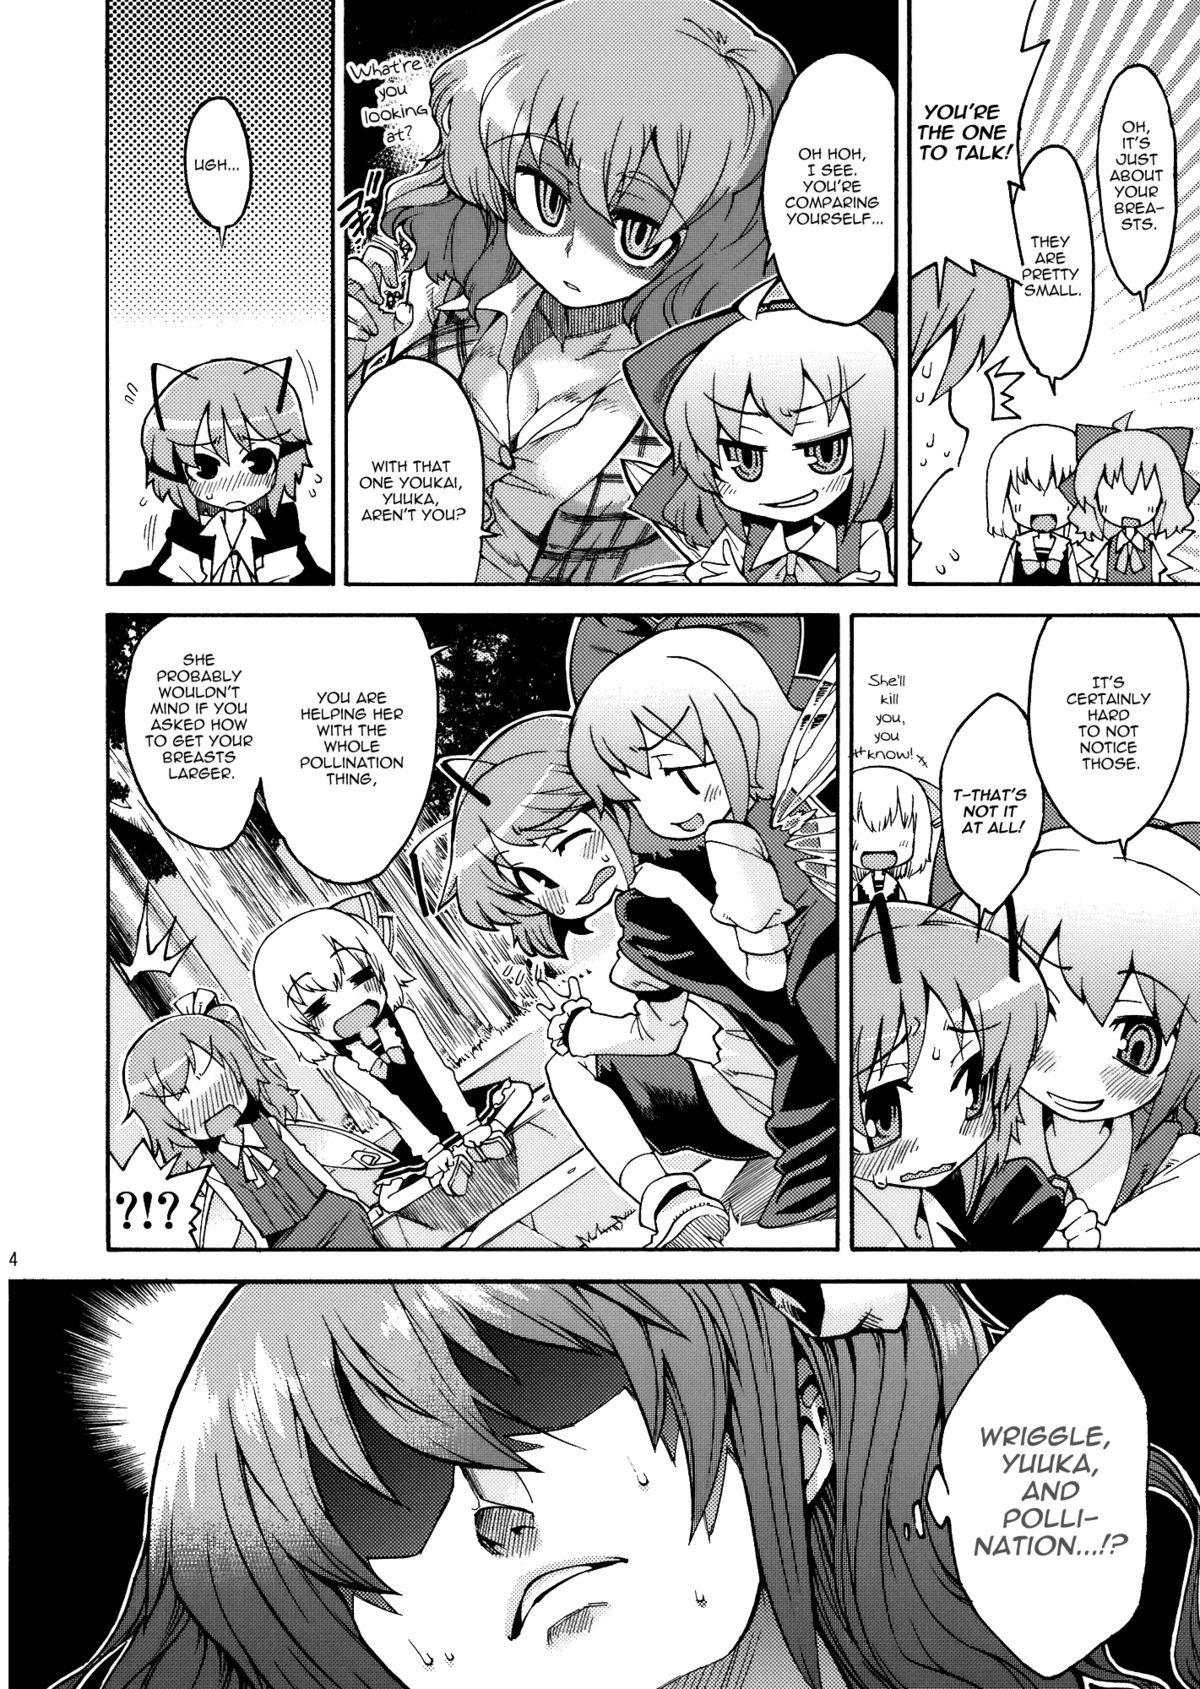 Best Blowjob Wriggle Chuudoku | Hooked on Wriggle - Touhou project Hot Cunt - Page 3